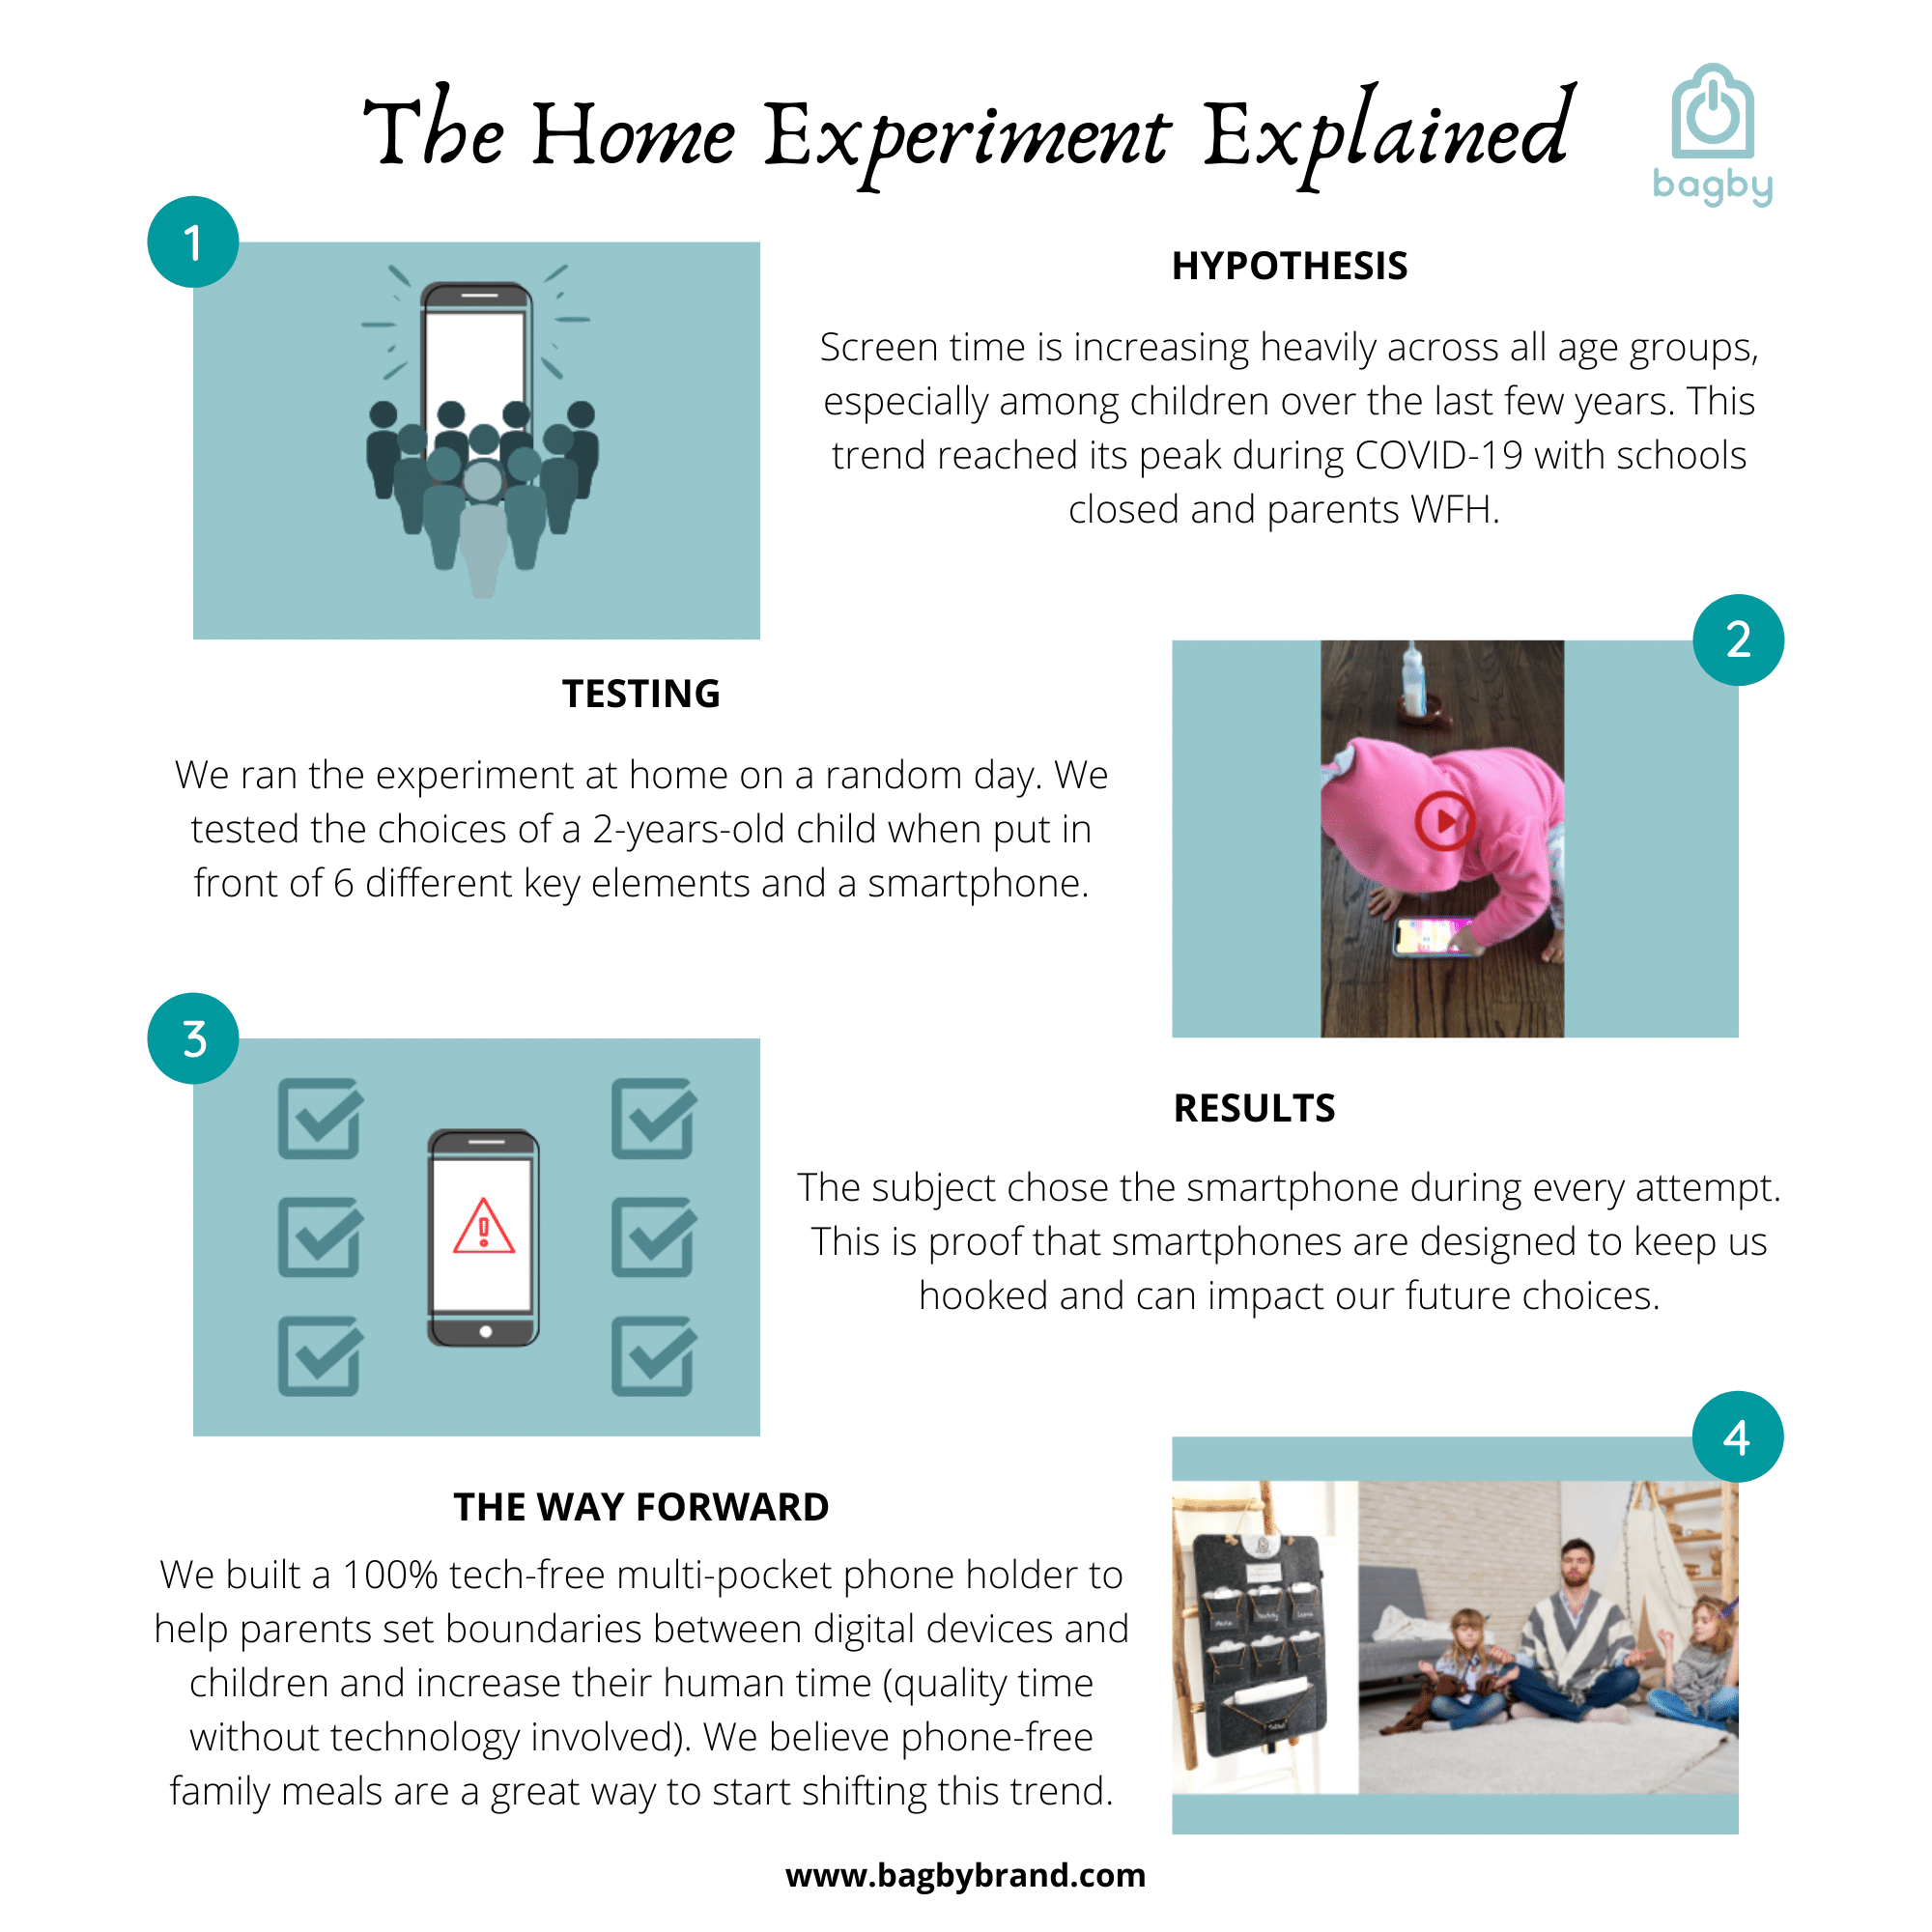 The Home Experiment Explained